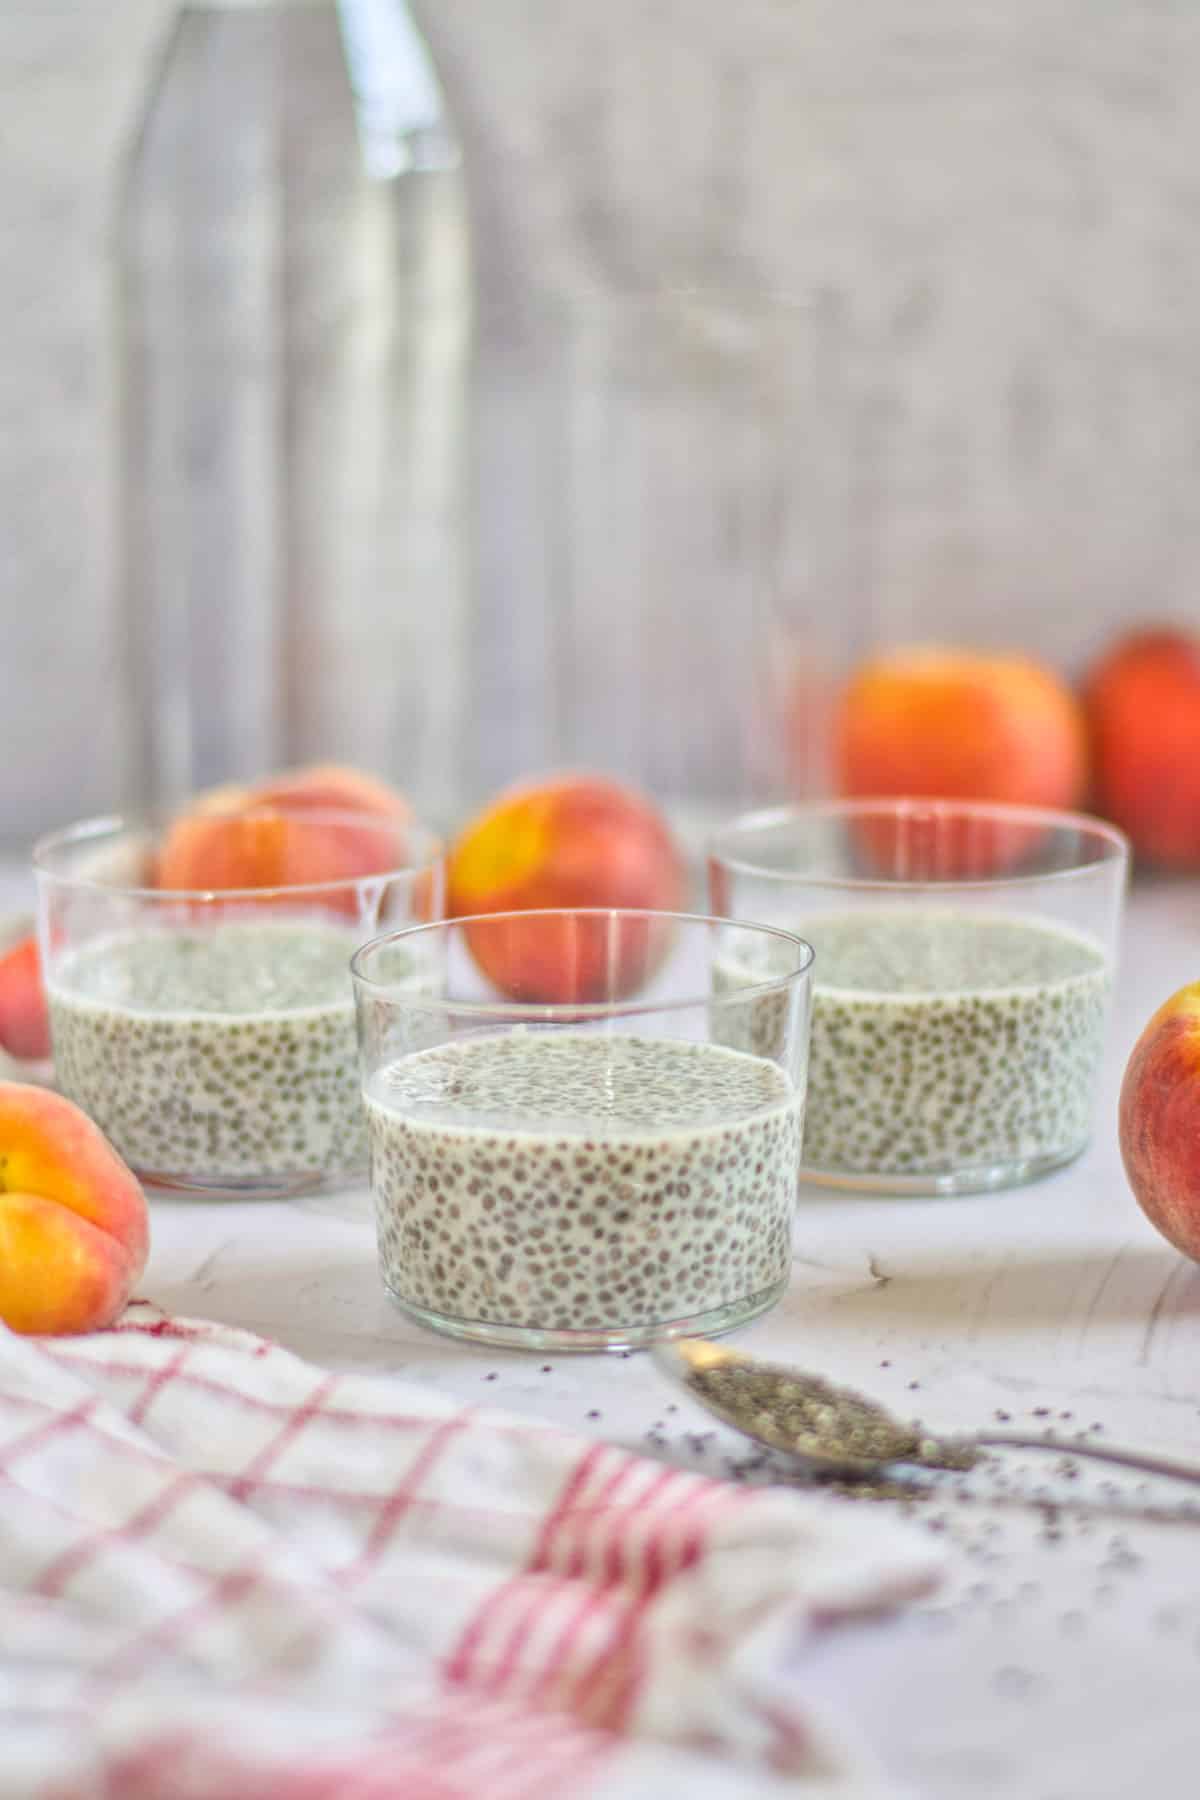 chia pudding in cups with peaches on a table